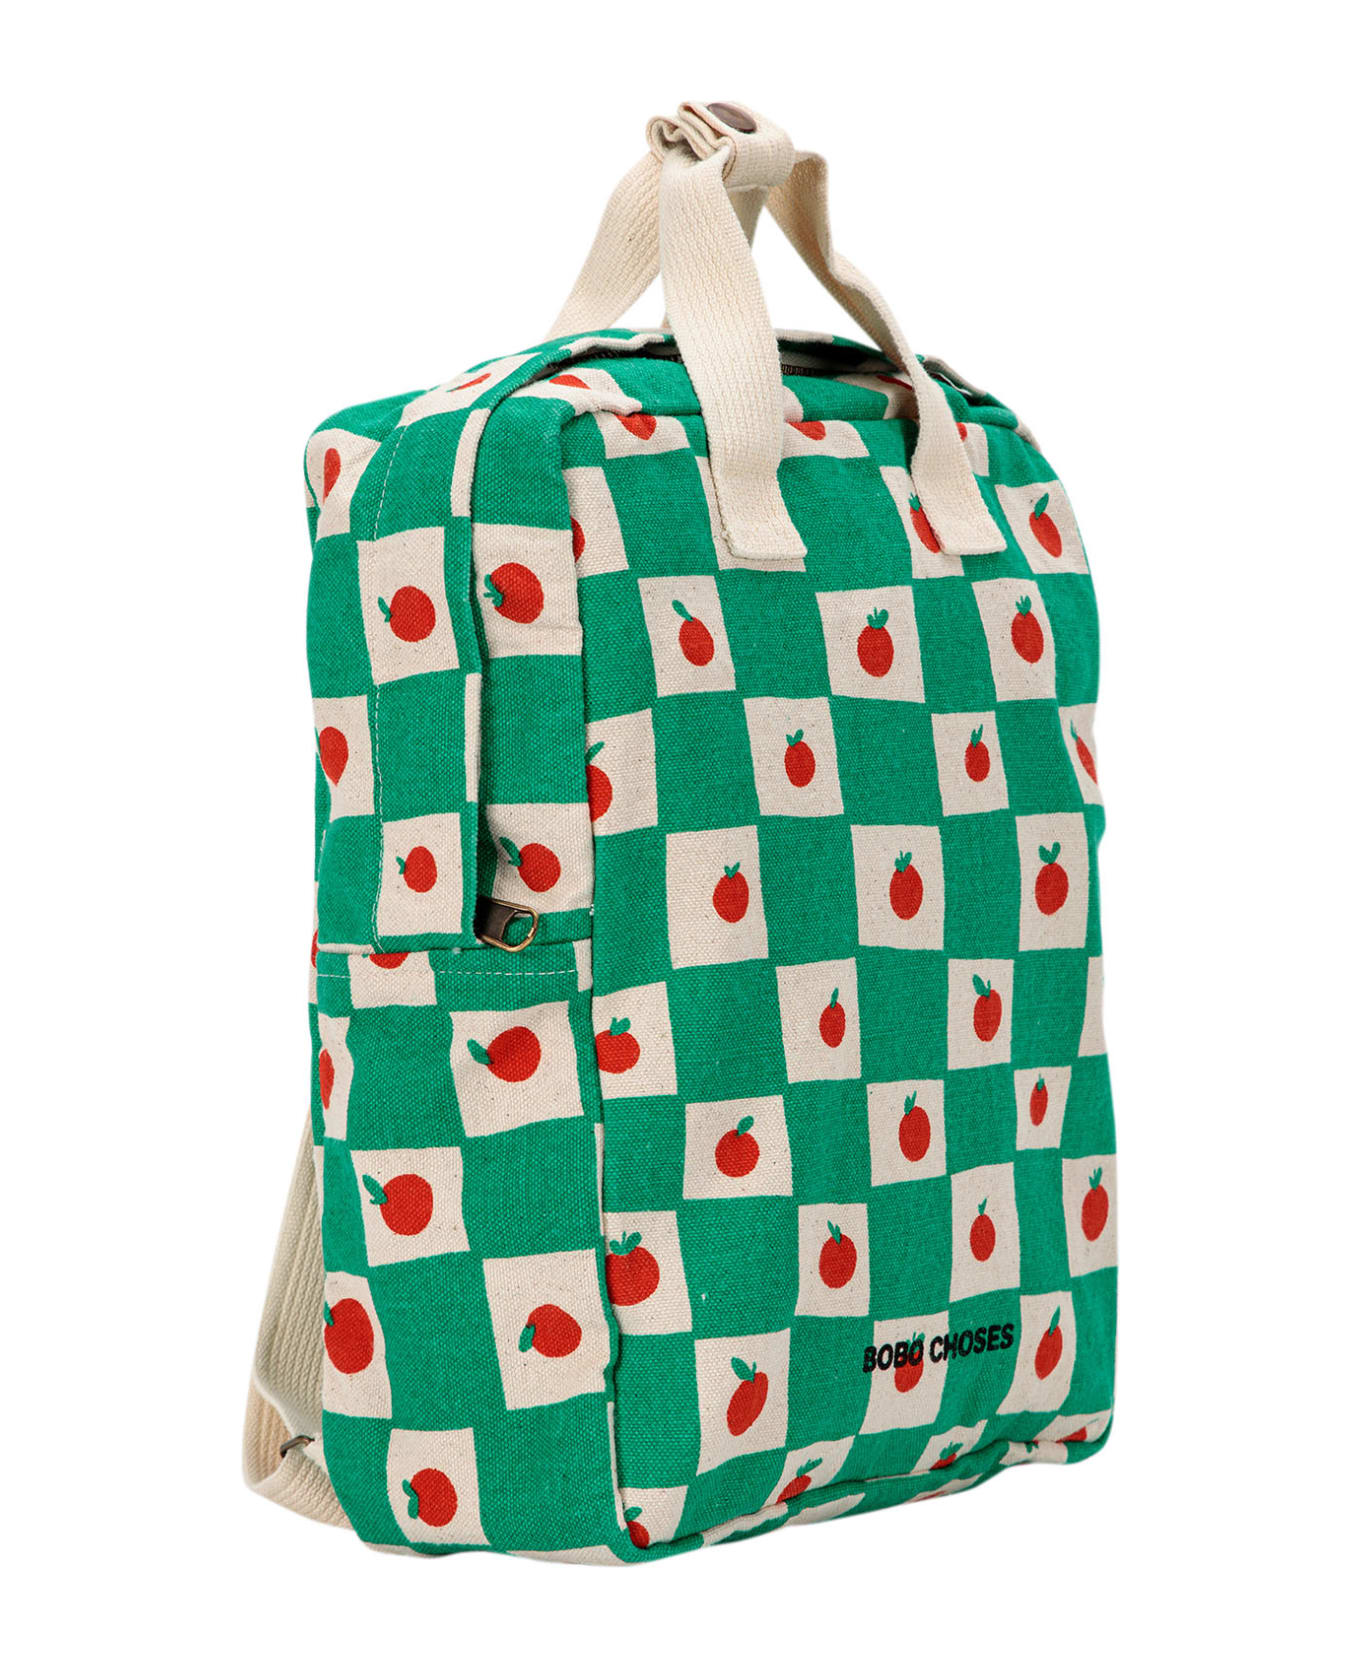 Bobo Choses Green Backpack With Tomatoes For Kids - Green アクセサリー＆ギフト